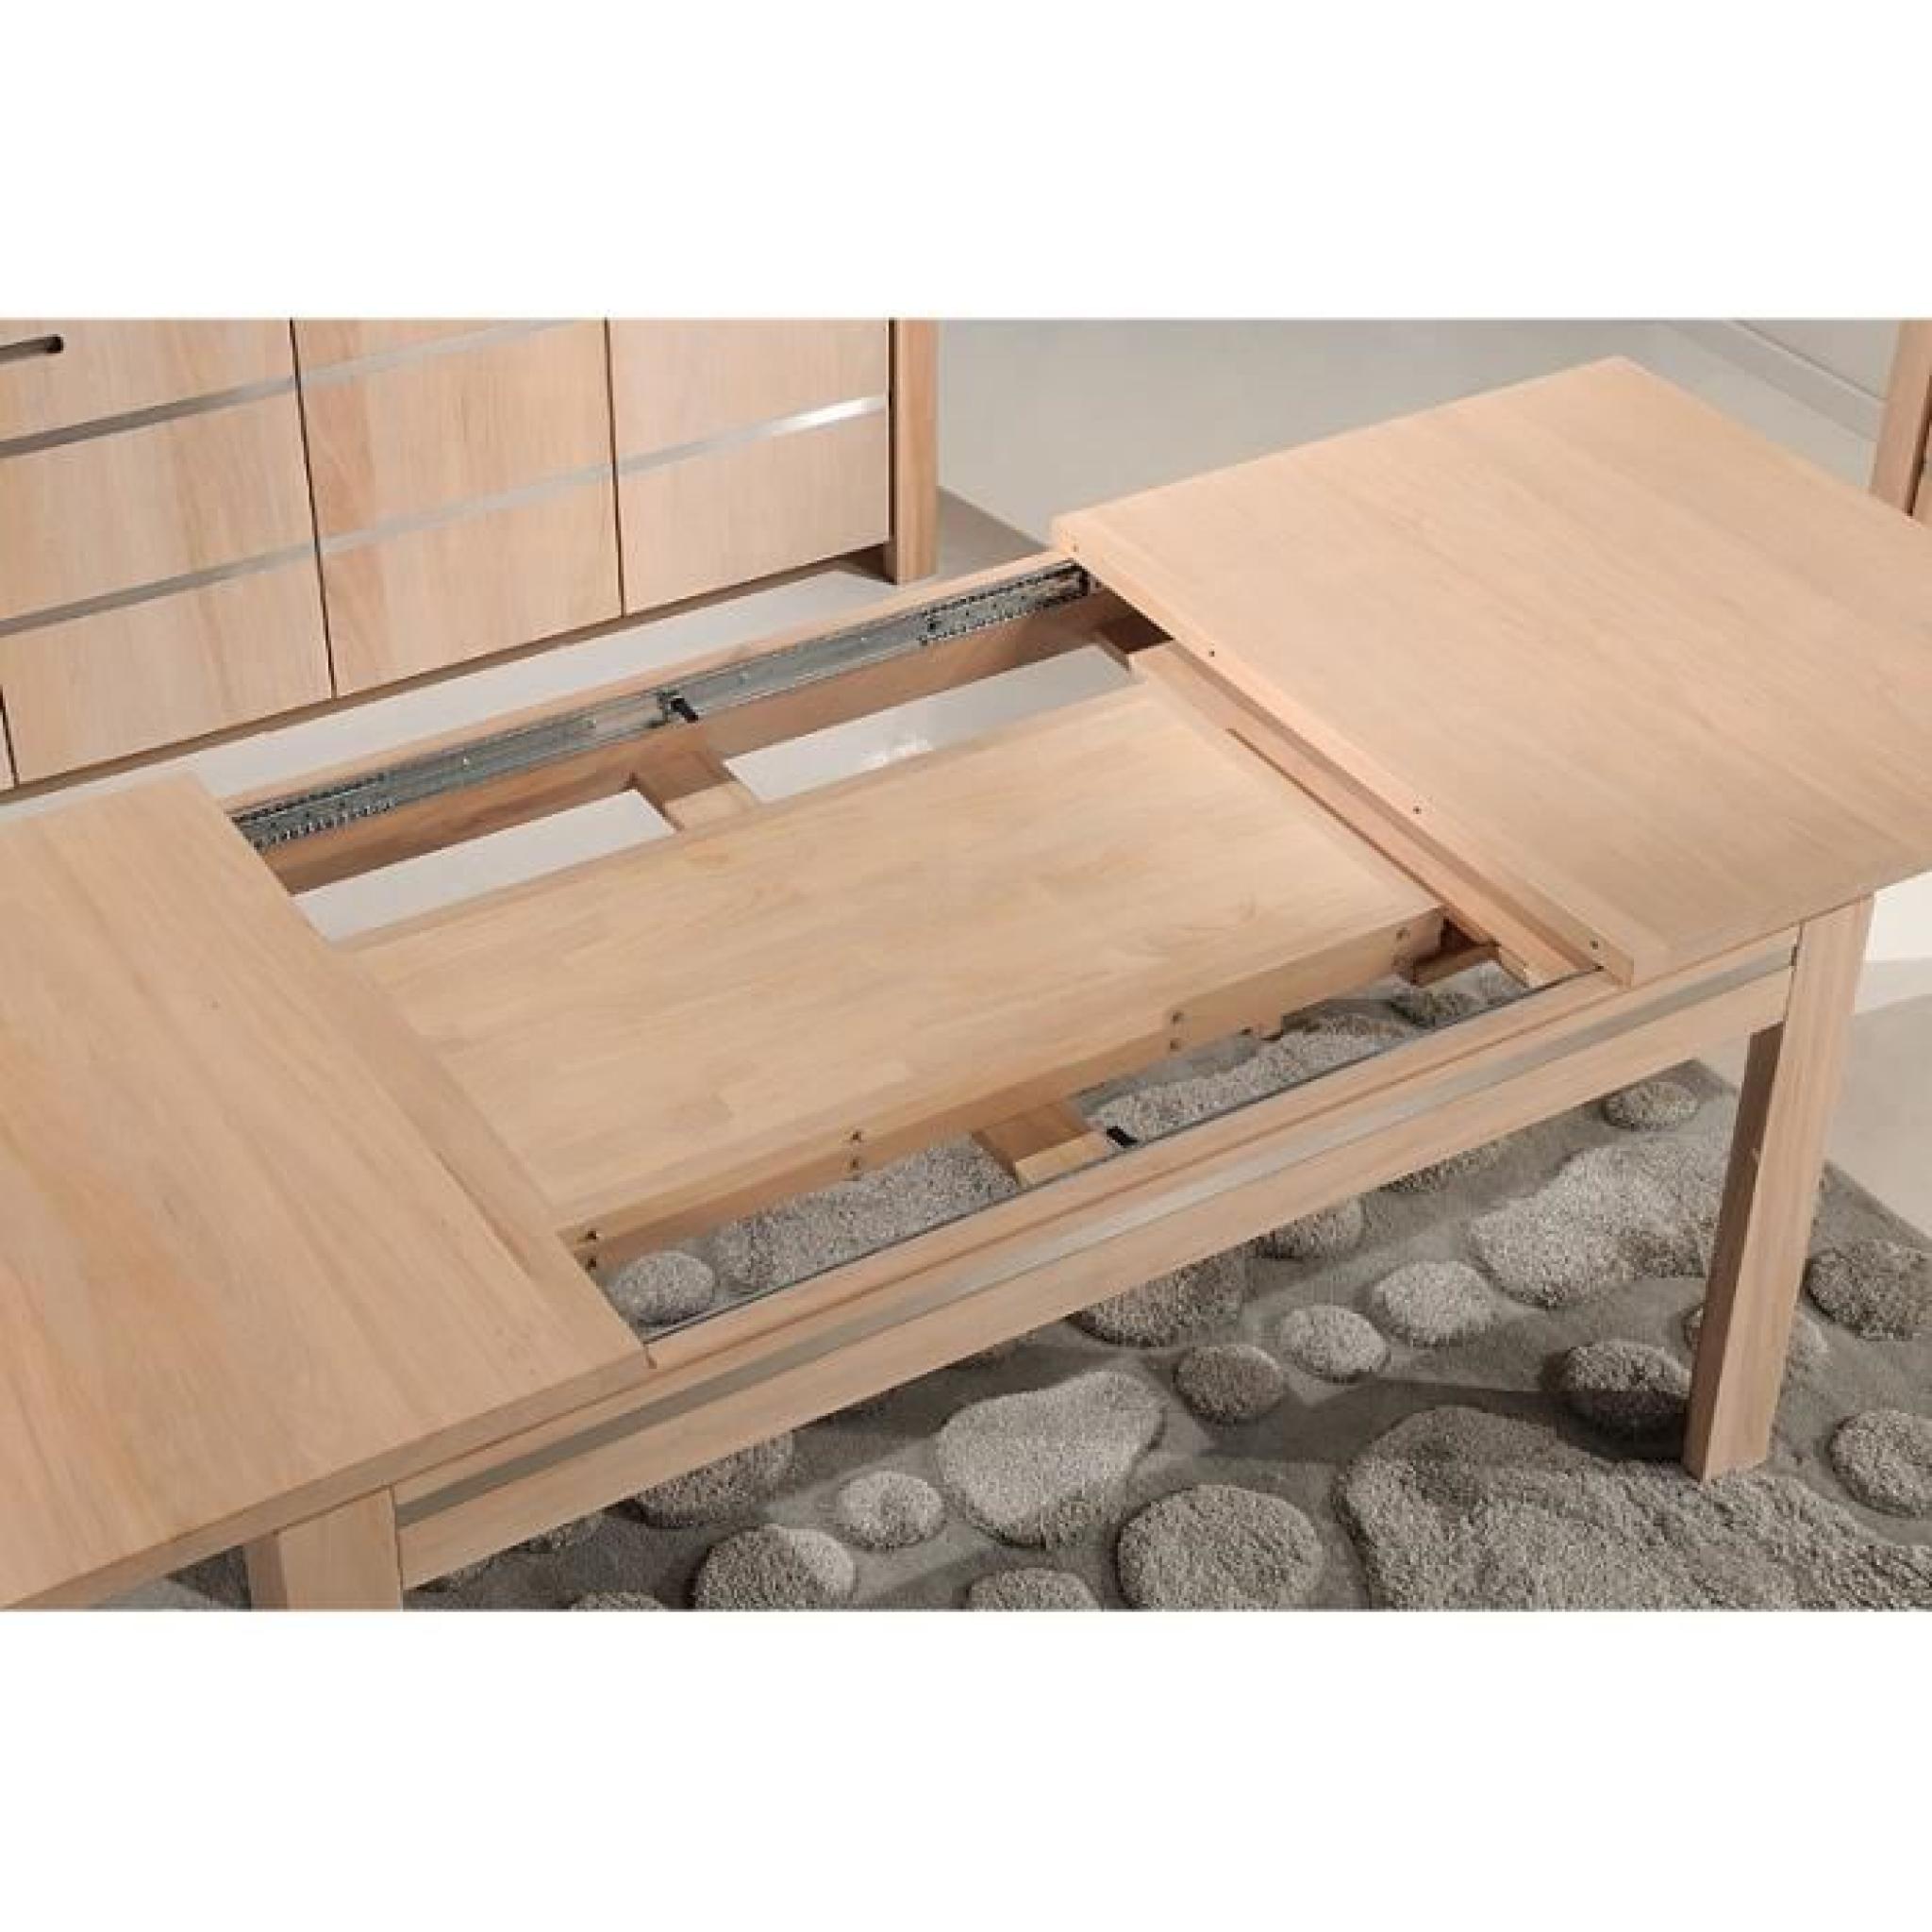 Table OPALE 180/95 ORME MASSIF-INOX (Orme - Satiné) pas cher